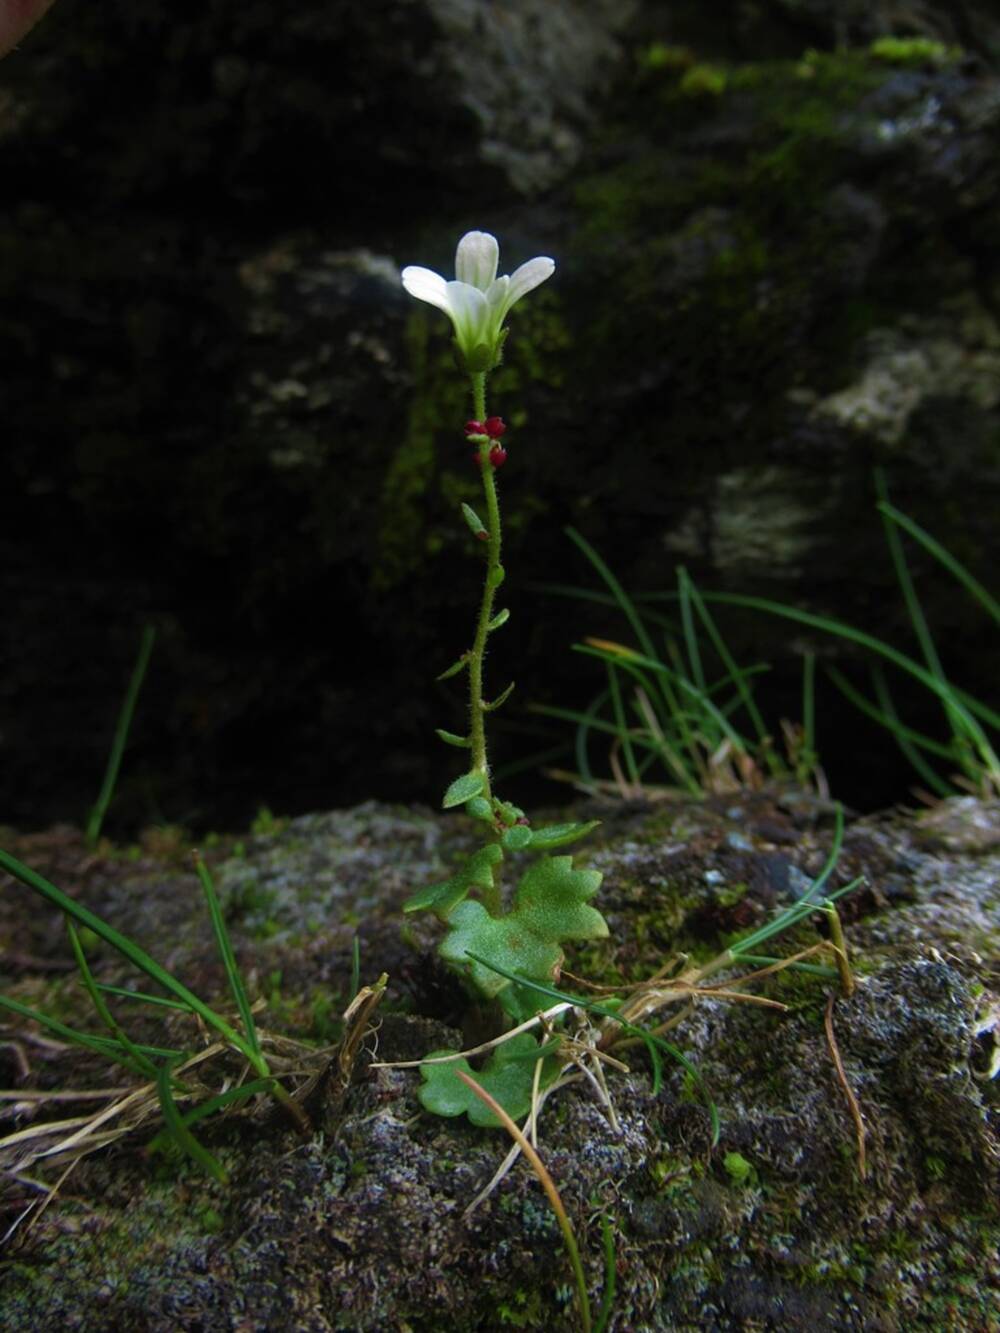 An upright white-flowered alpine plant growing in a rocky landscape.